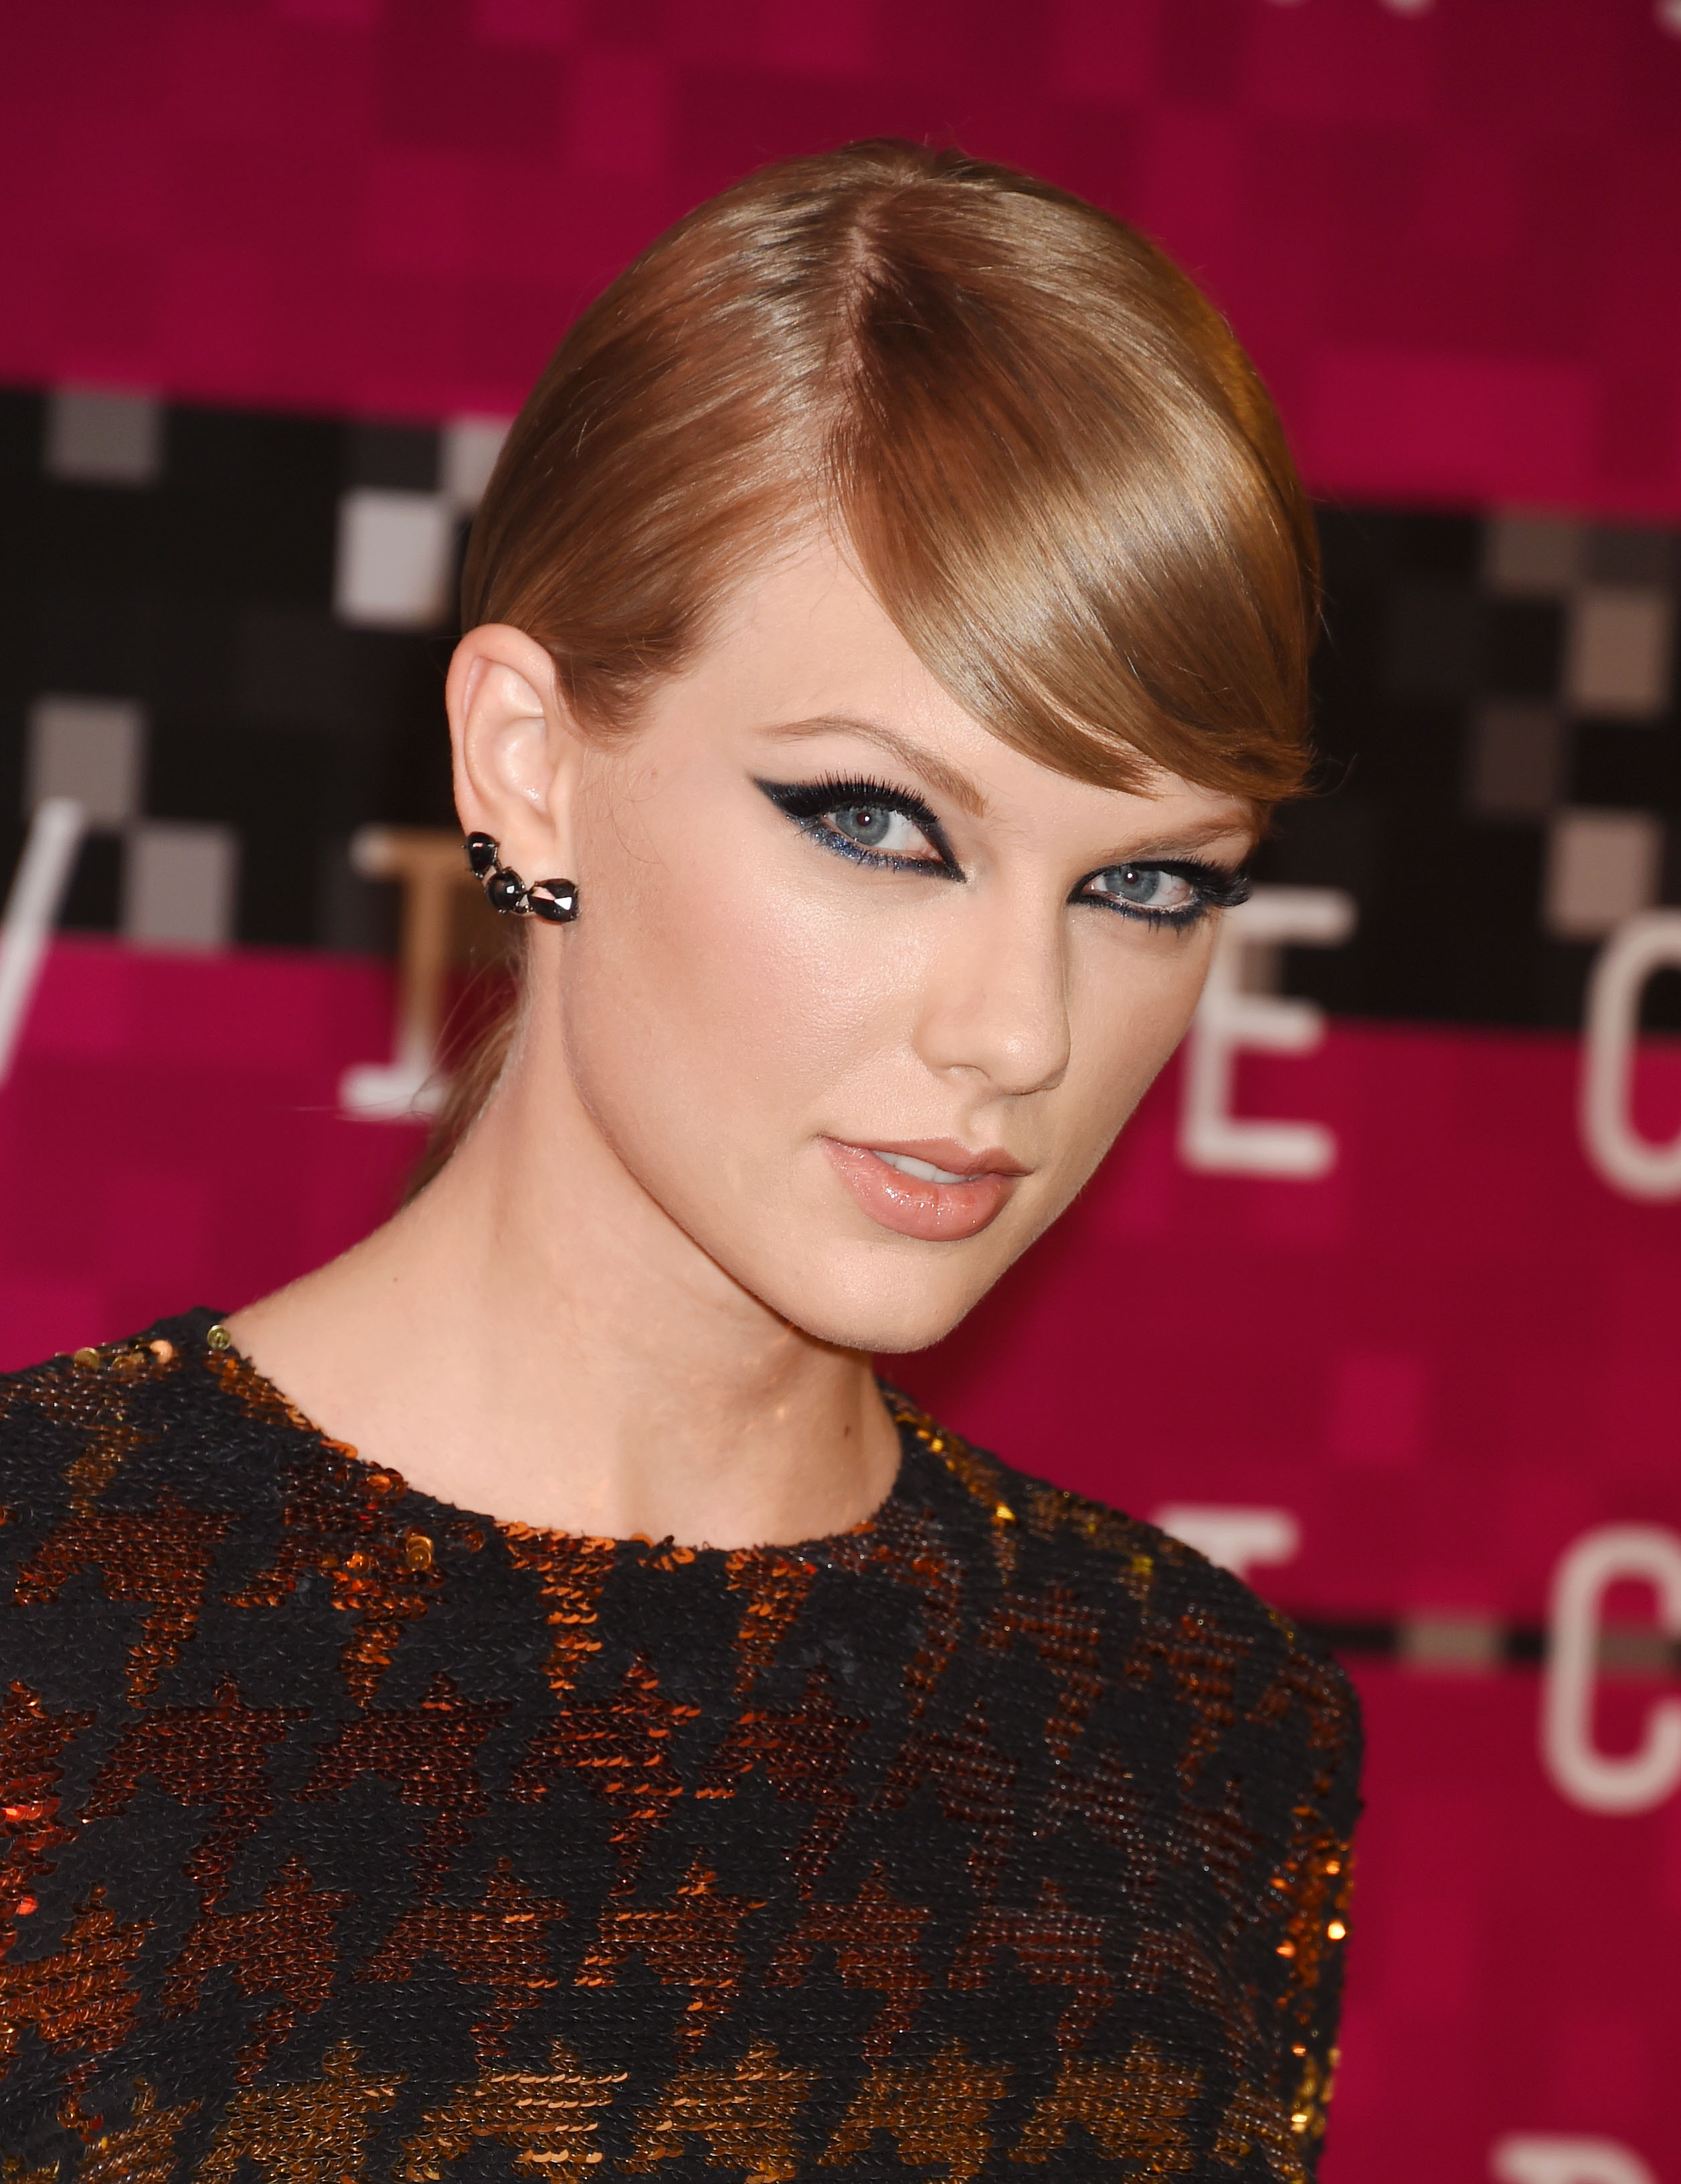 Taylor Swift at the 2015 MTV Video Music Awards in Los Angeles on Aug. 30, 2015. (Jeffrey Mayer—WireImage/Getty Images)